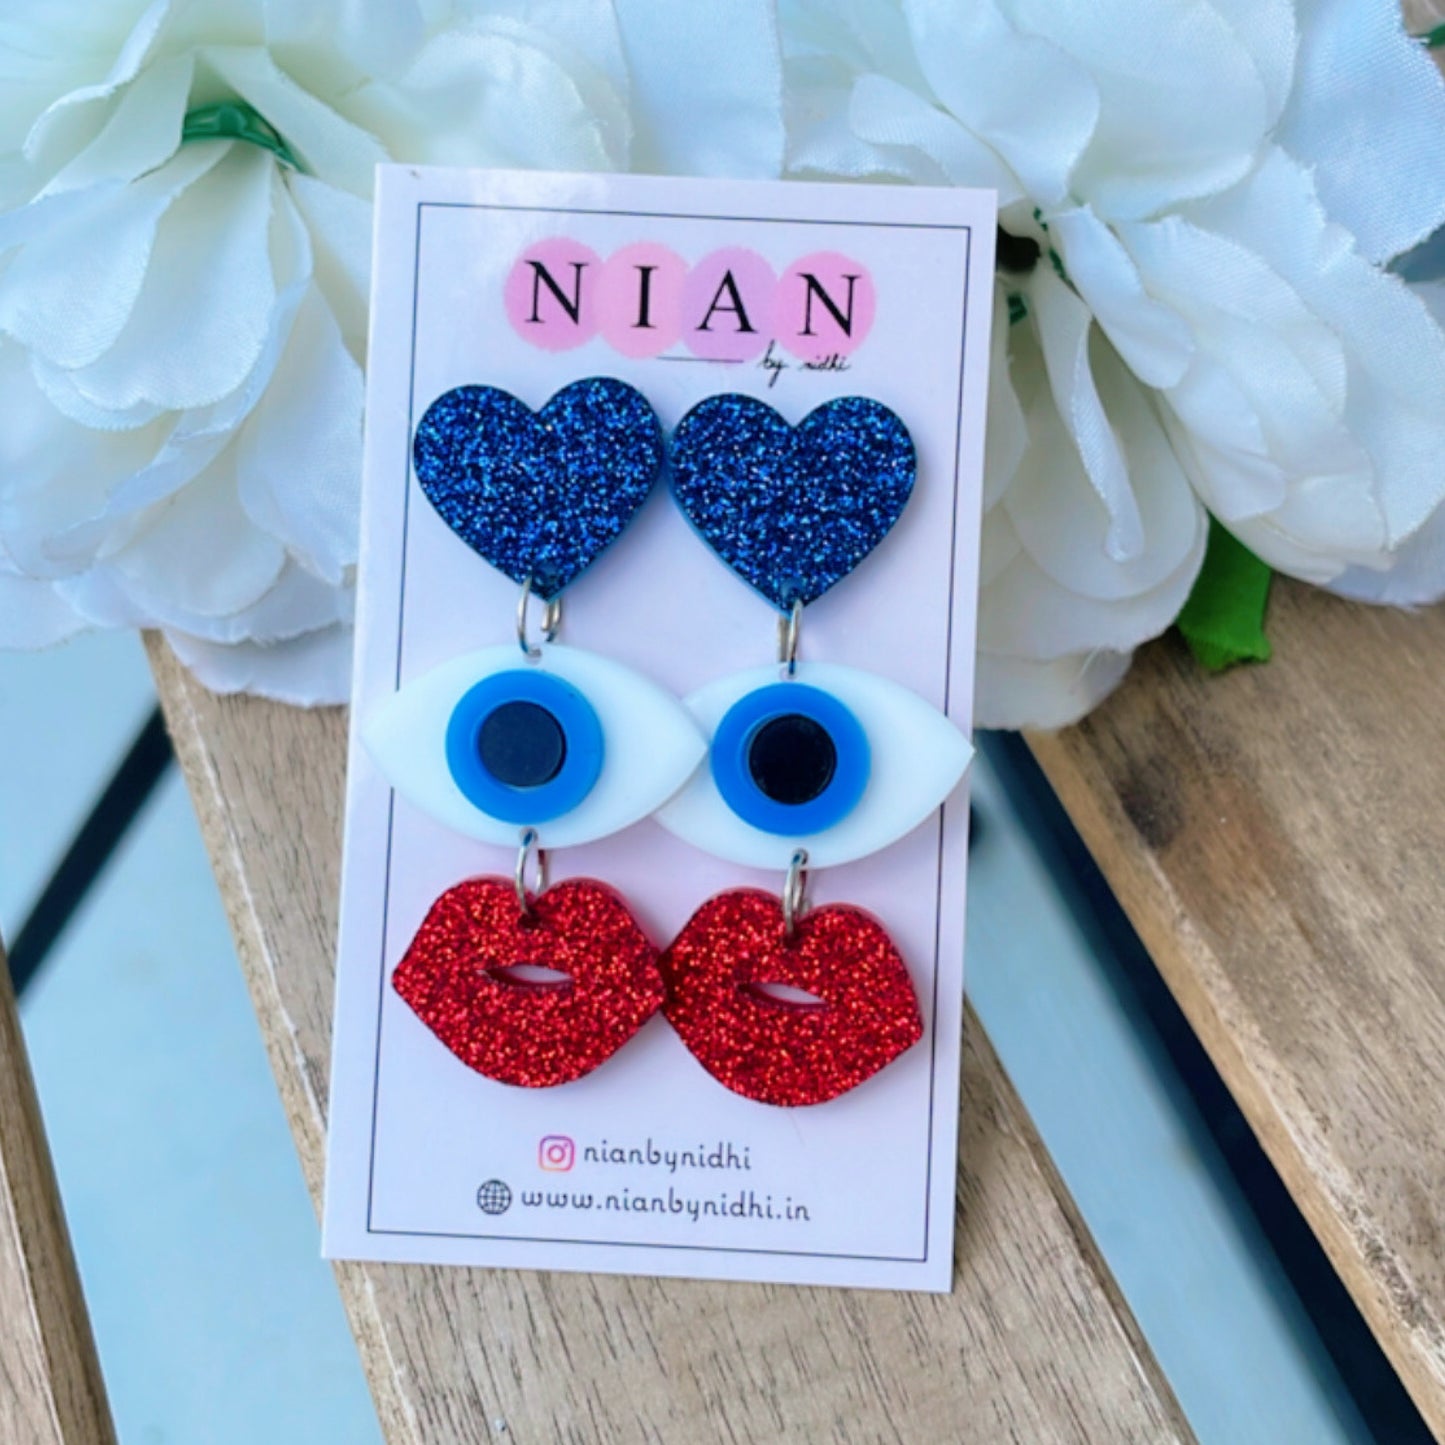 Evil Eye Charm Earrings - Shimmer blue, red and white - Nian by Nidhi - placed in a light beige background with a white flower